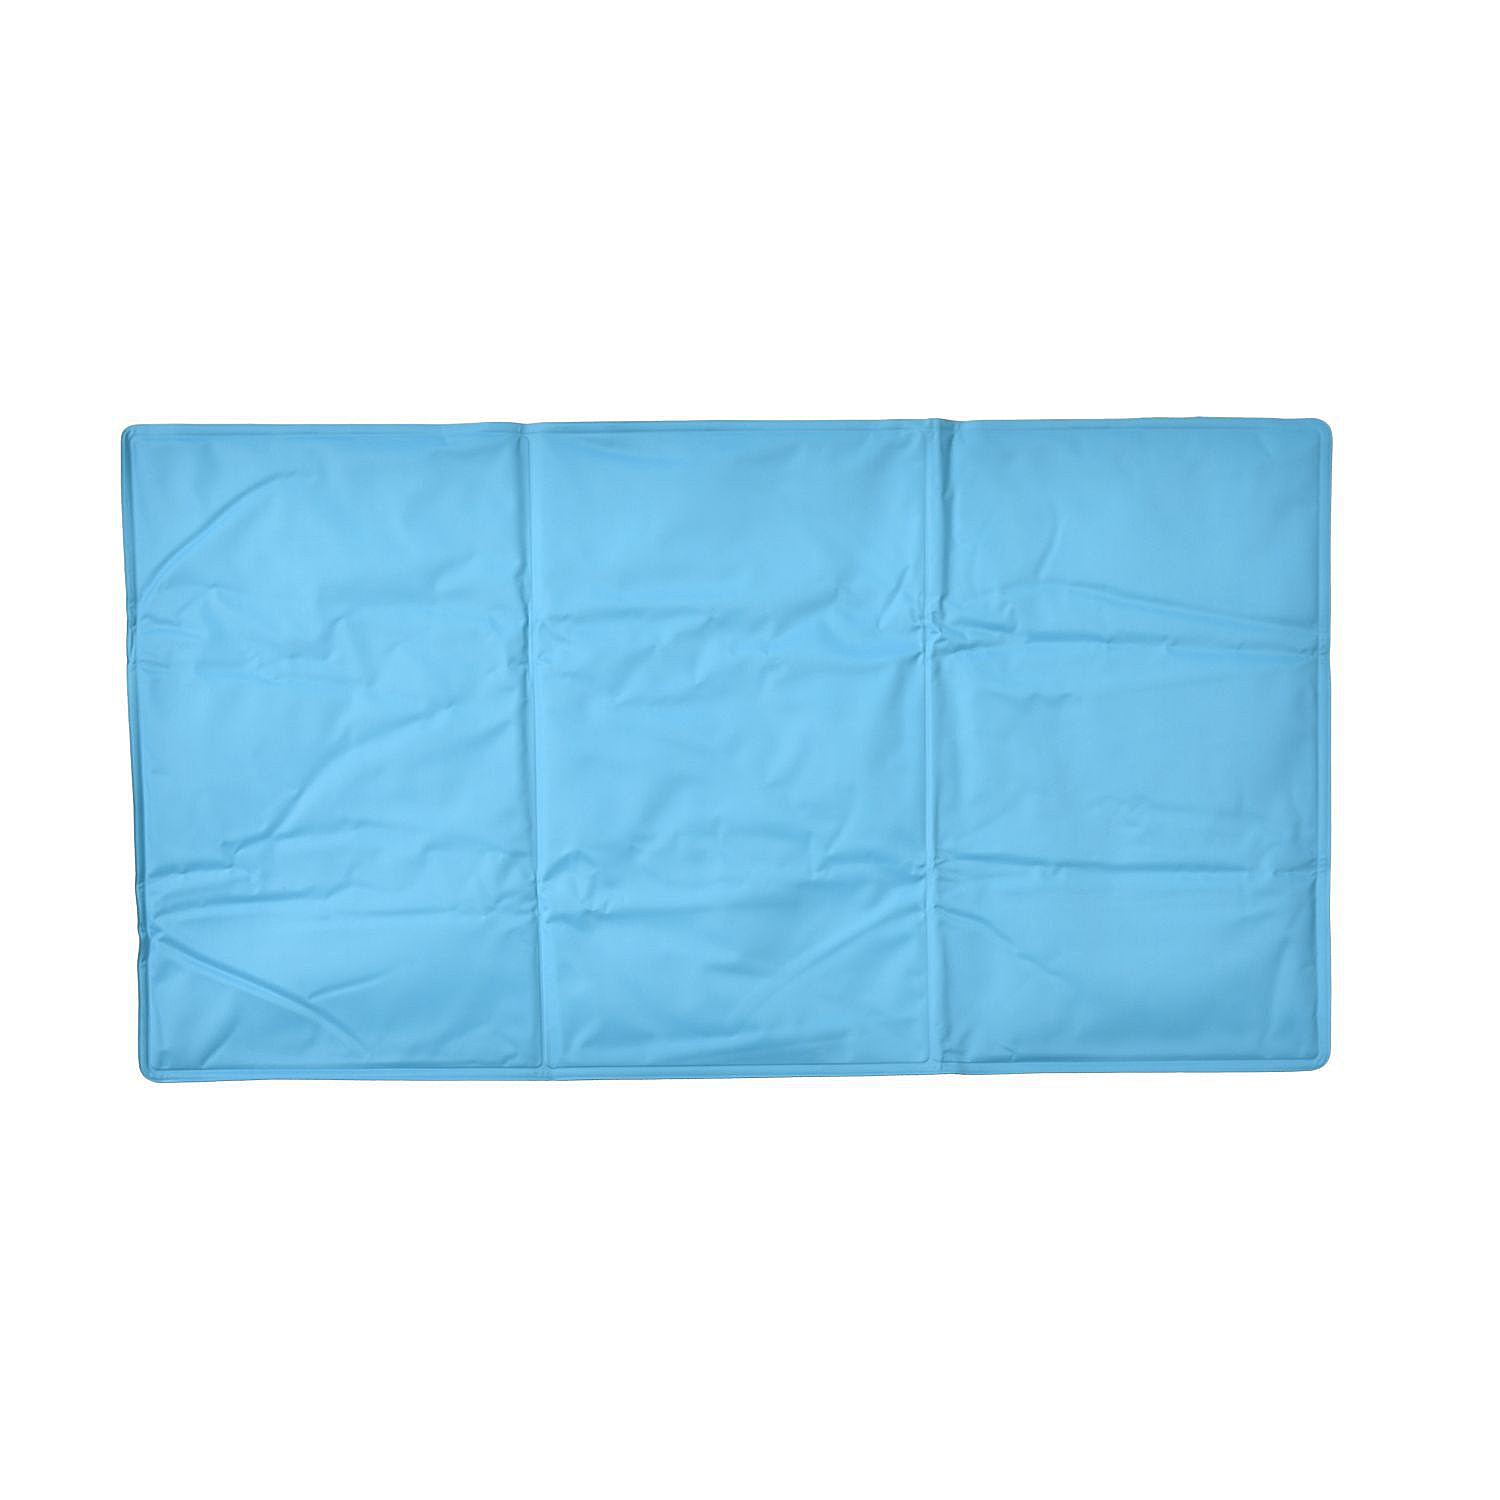 Homesmart-Extra-Large-Pet-Cooling-Mat-Pad-Size-90x50-Cm-Teal